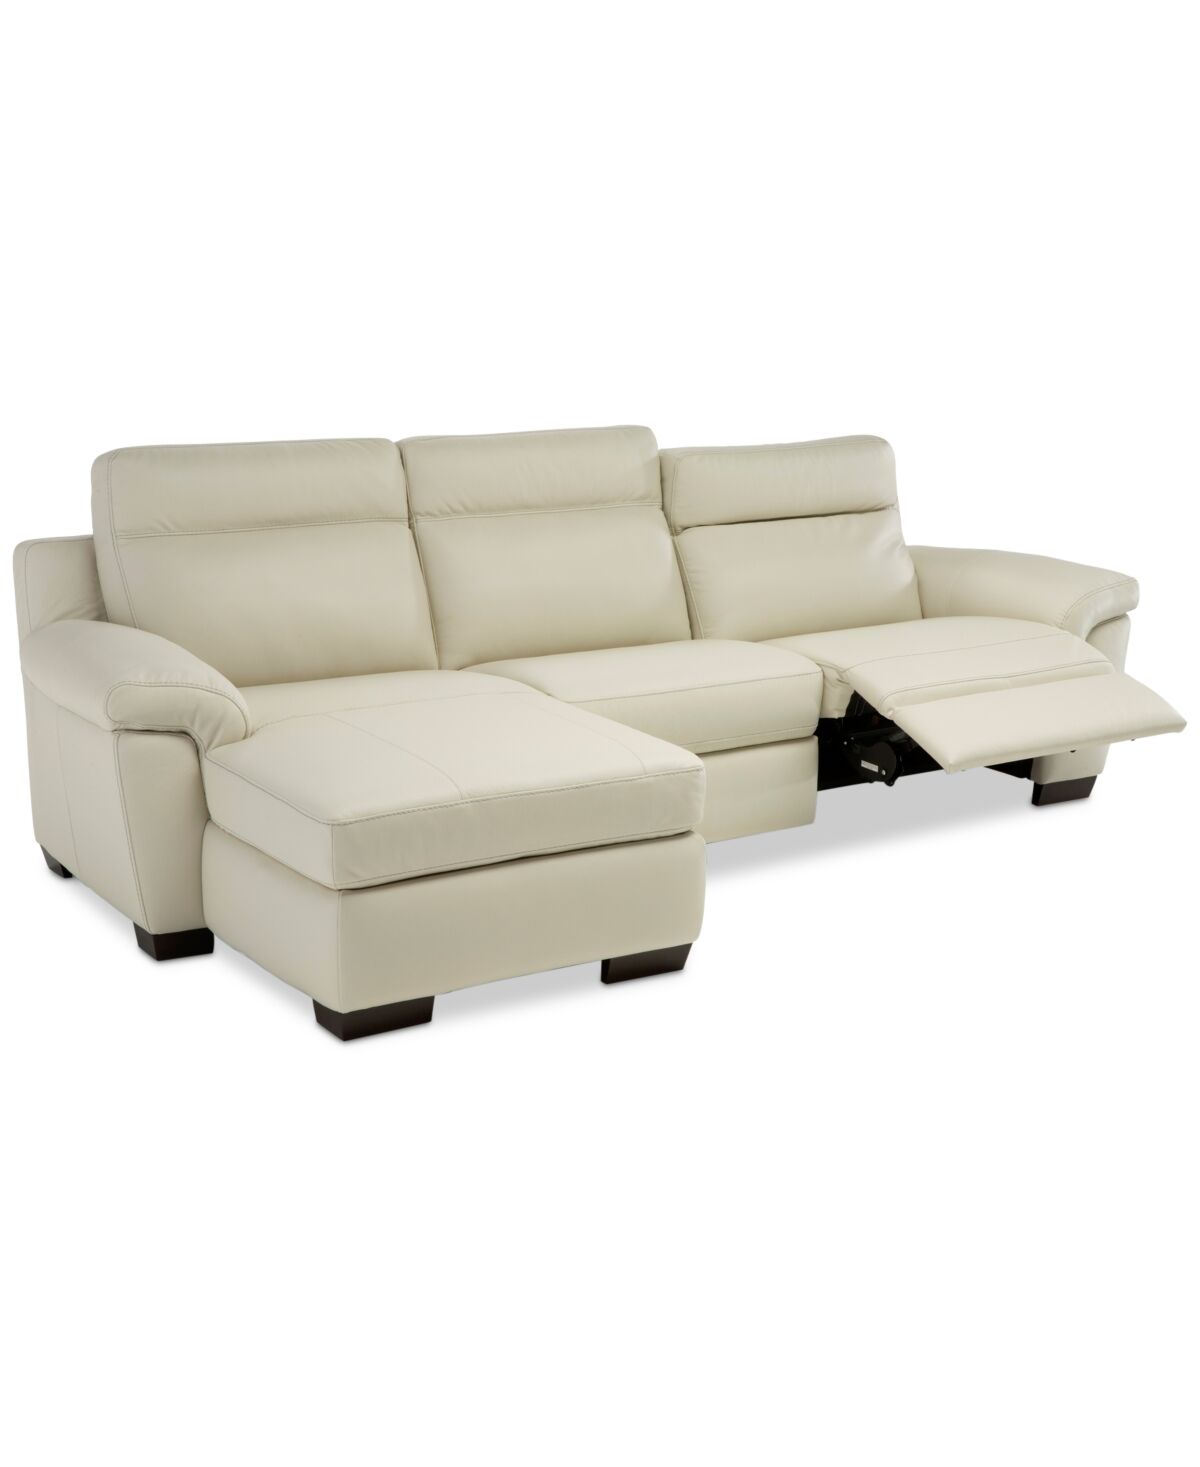 Furniture Julius Ii 3-Pc. Leather Sectional Sofa With 1 Power Recliner, Power Headrests, Chaise And Usb Power Outlet - Off White